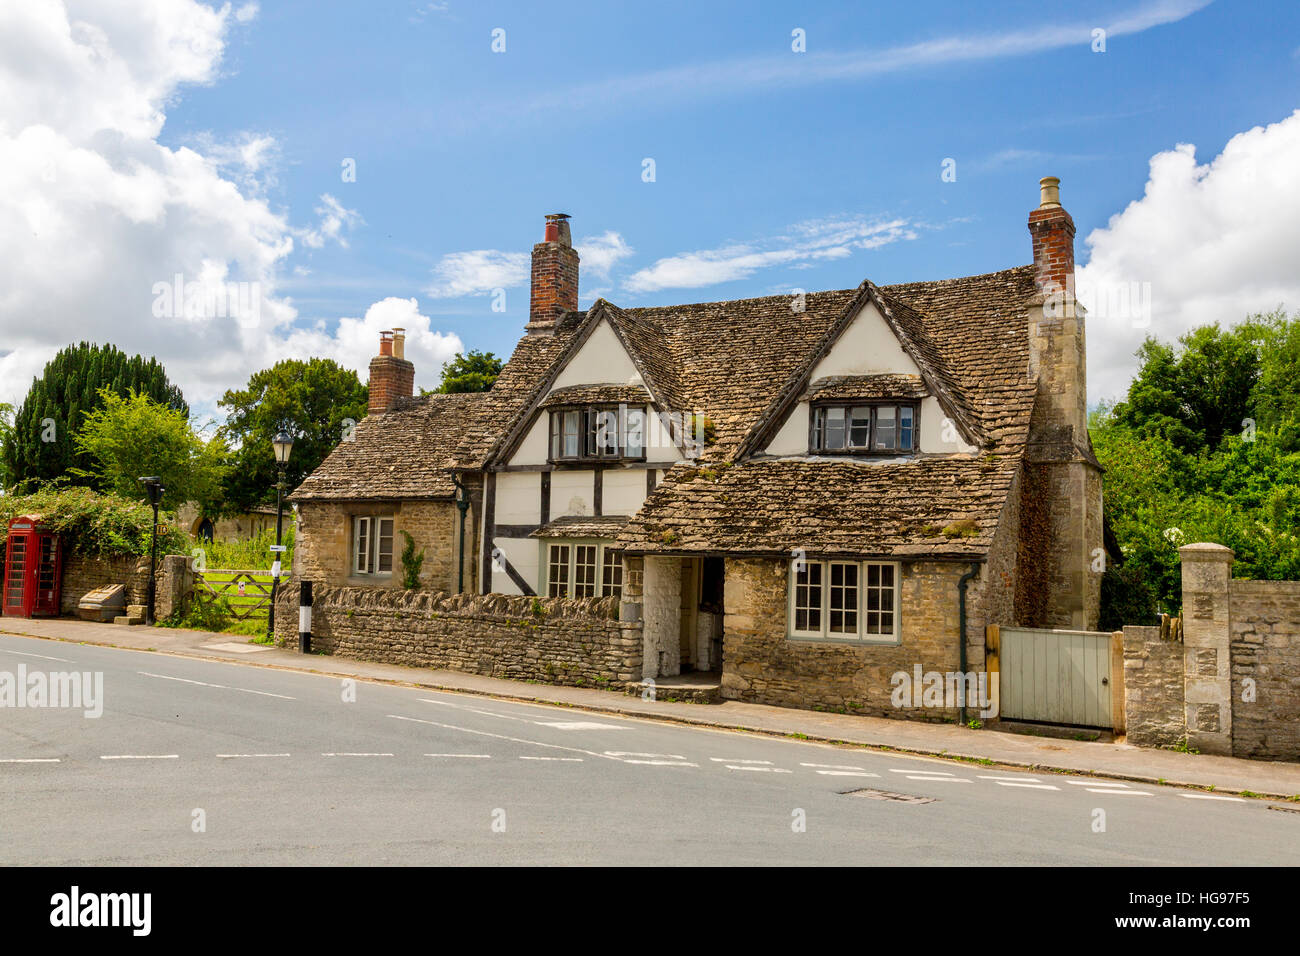 A half-timbered and stone built cottage with stone roof tiles in the village of Lacock, Wiltshire, England, UK Stock Photo